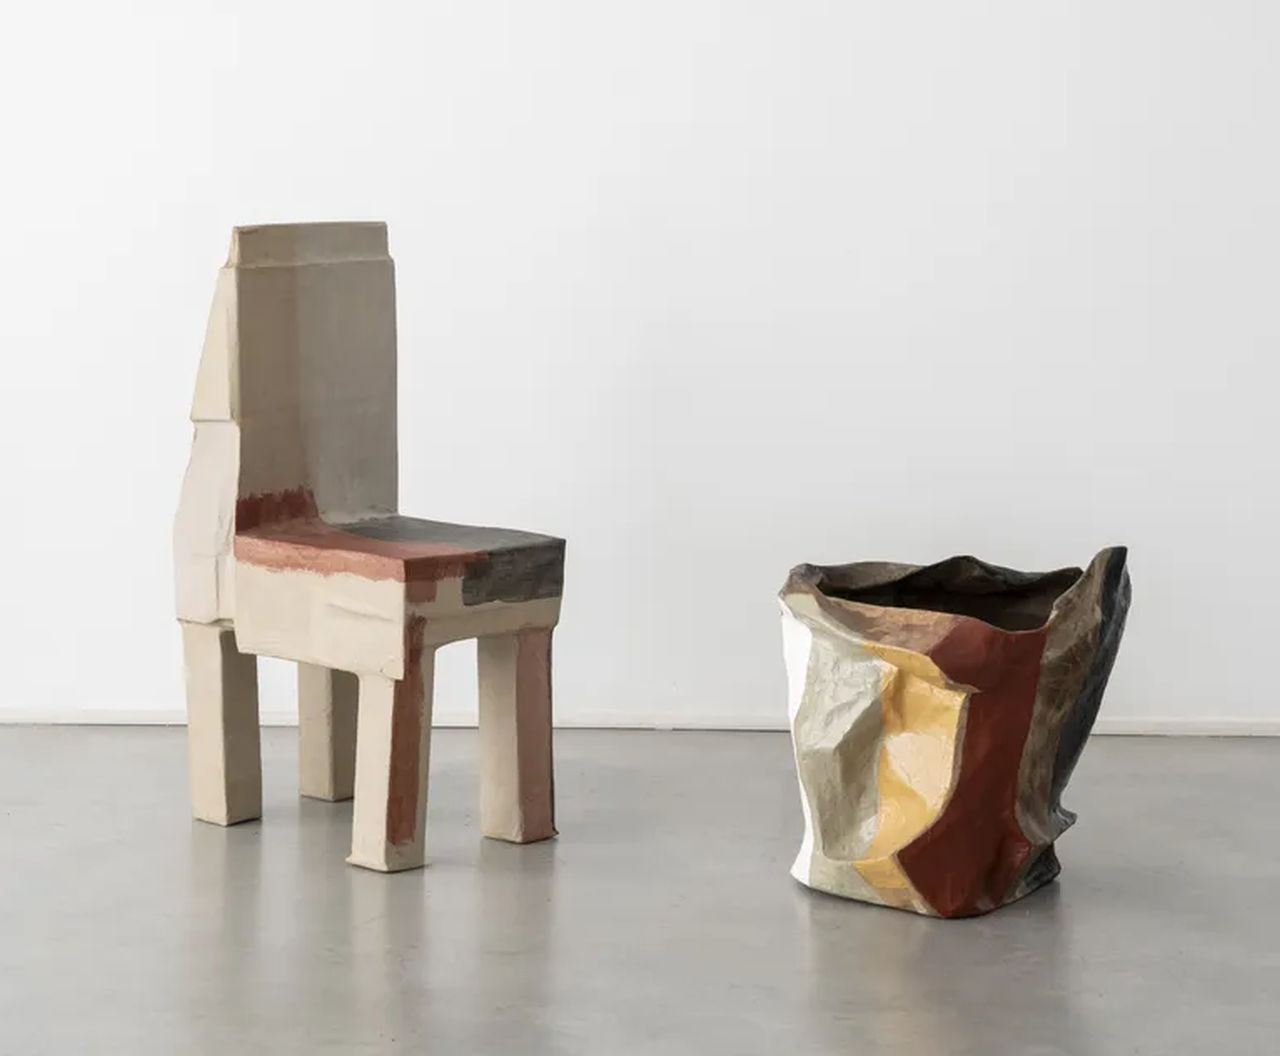 Max Lamb’s Cardboard Furniture Collection-plant based paints